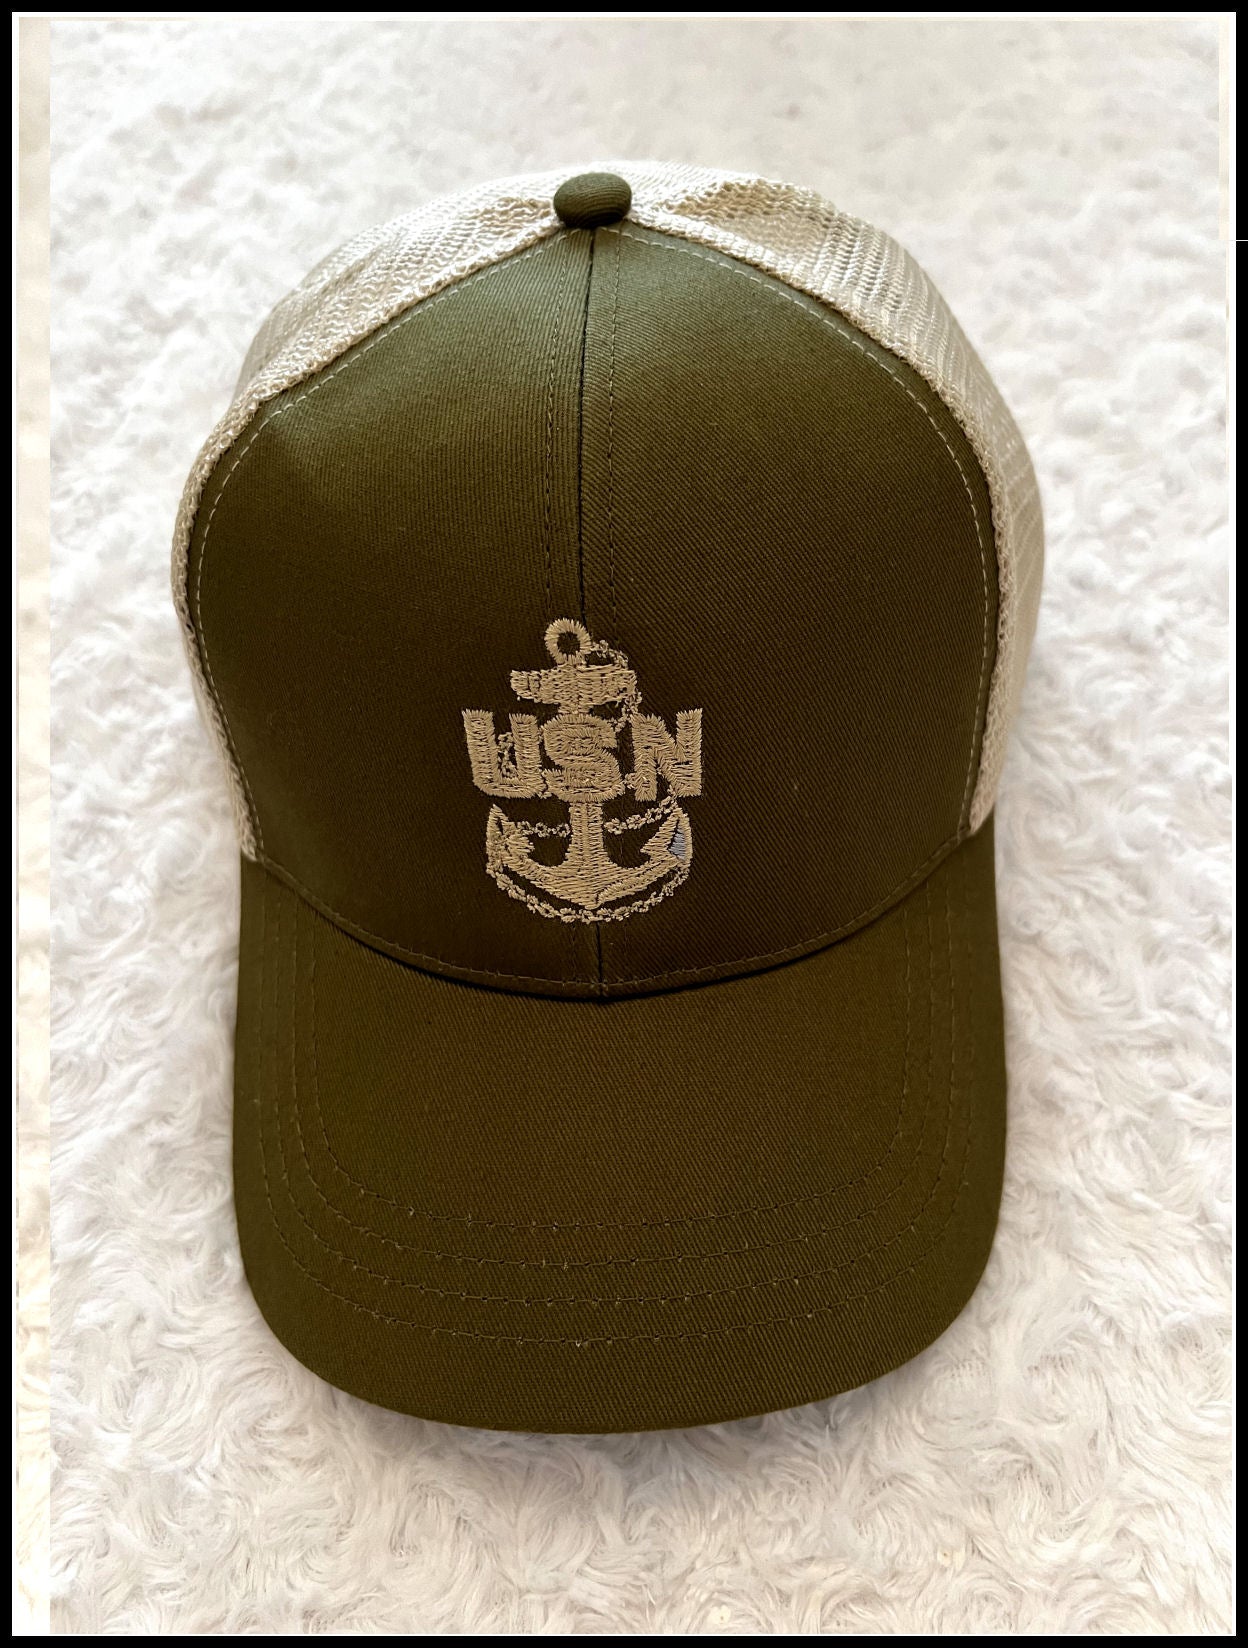 Chief Military Green and Cream Trucker Hat